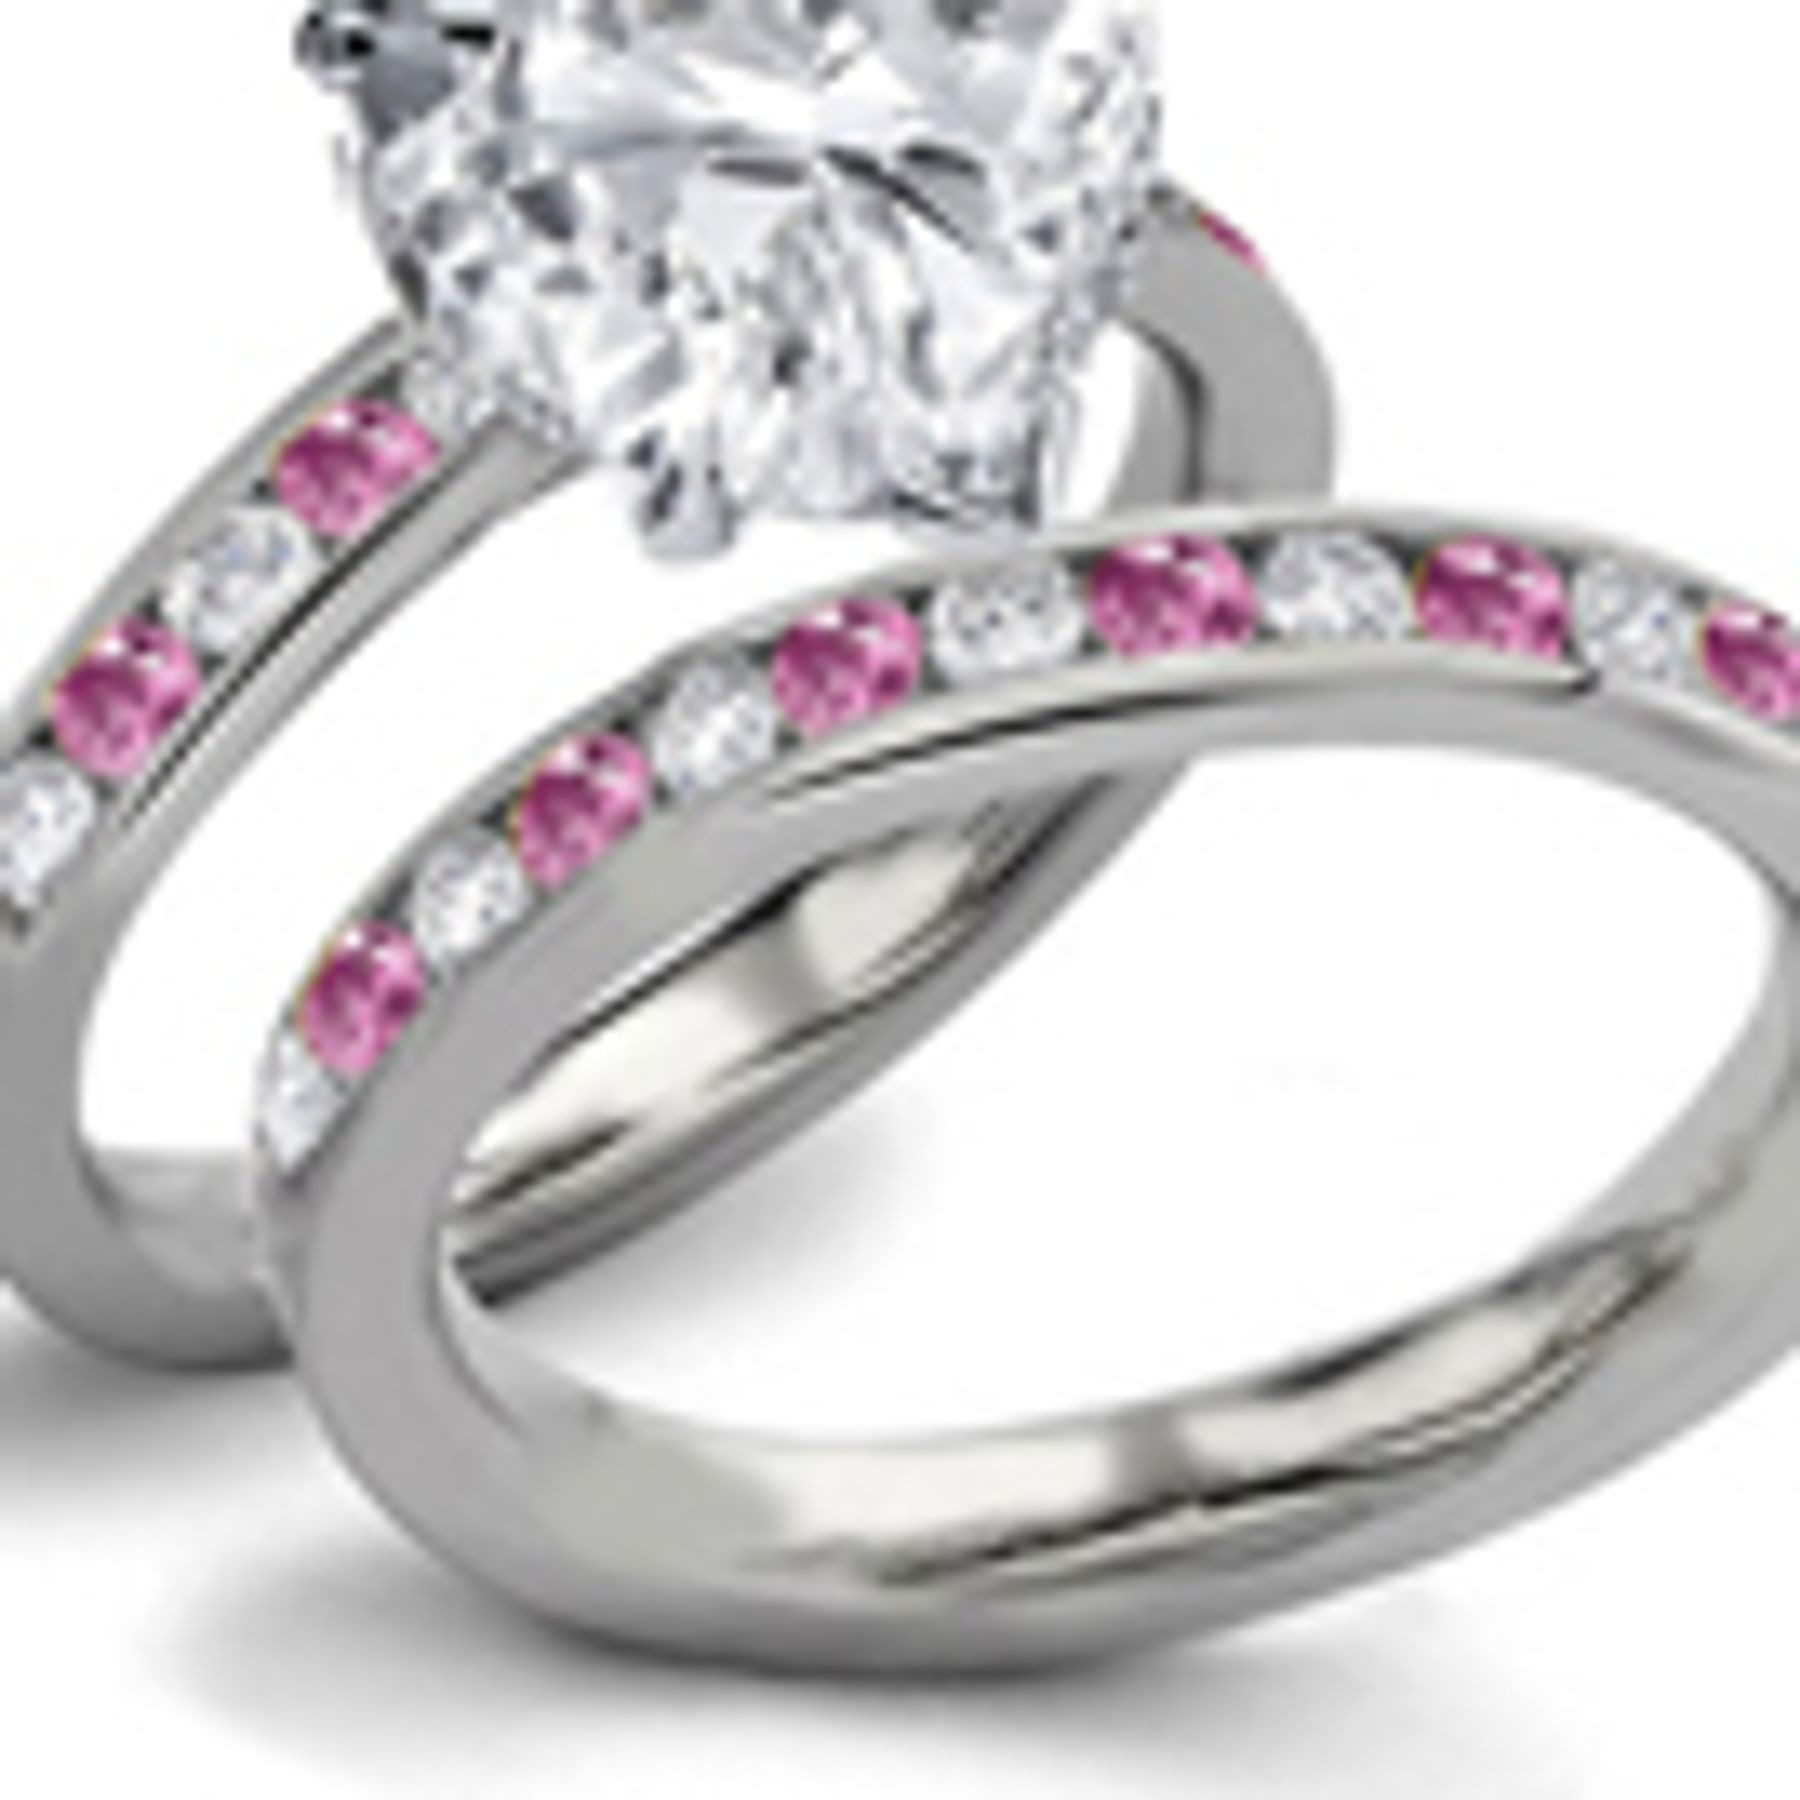 Pink Sapphire Heart Diamond Designer Engagement Rings Available in Women's Ring Size 3 to 10